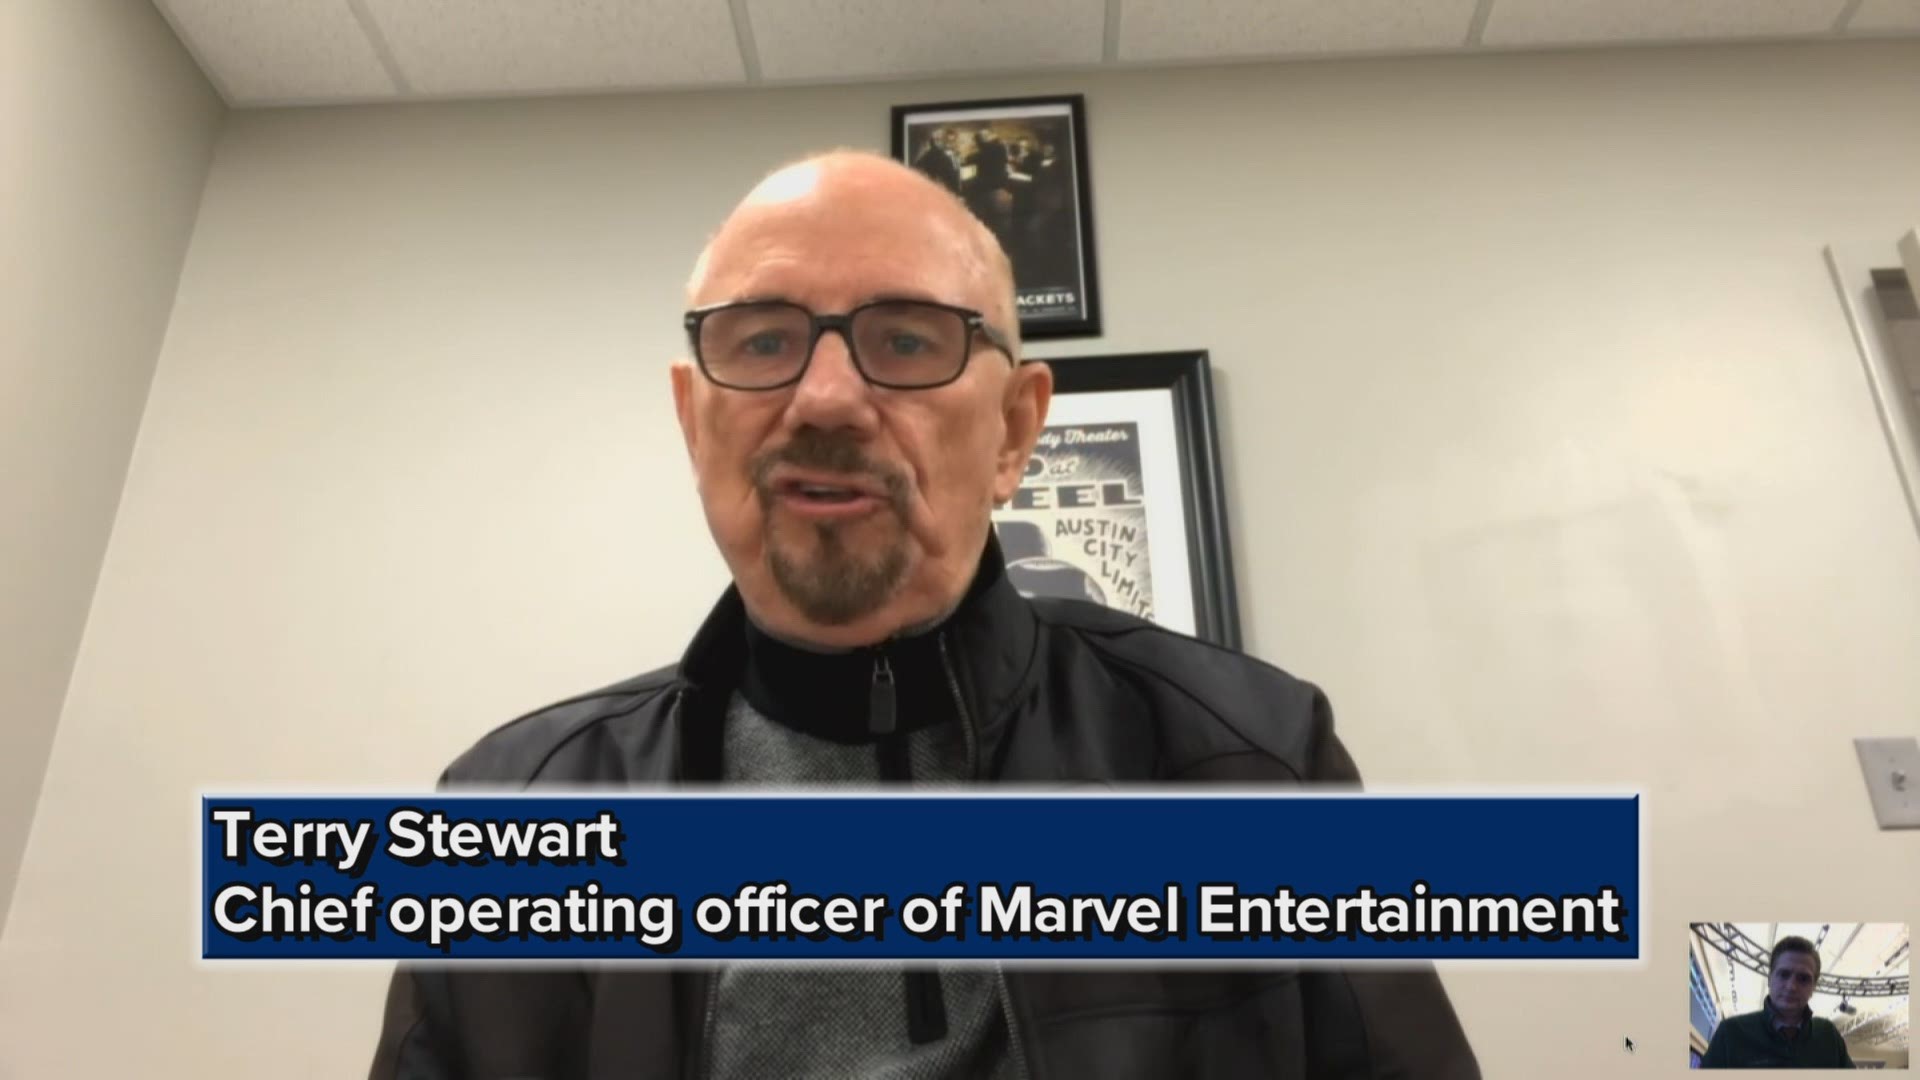 Terry Stewart reflects back on the life of Stan Lee